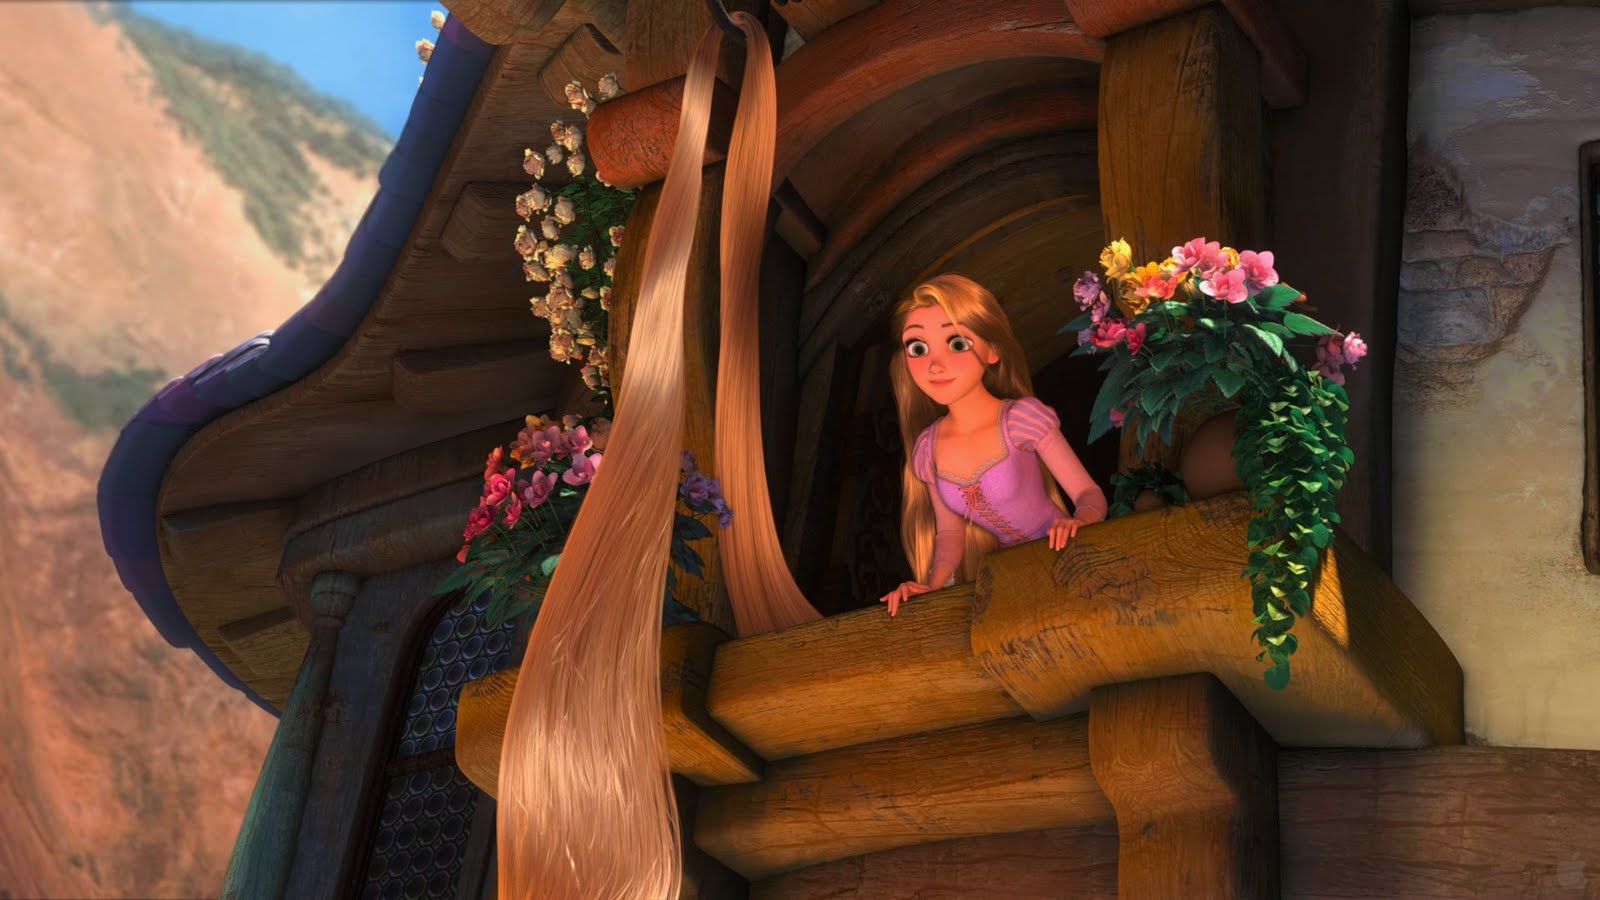 You got: Rapunzel! Which Disney Princess Are You? 👑 Take This Quiz to Find Out